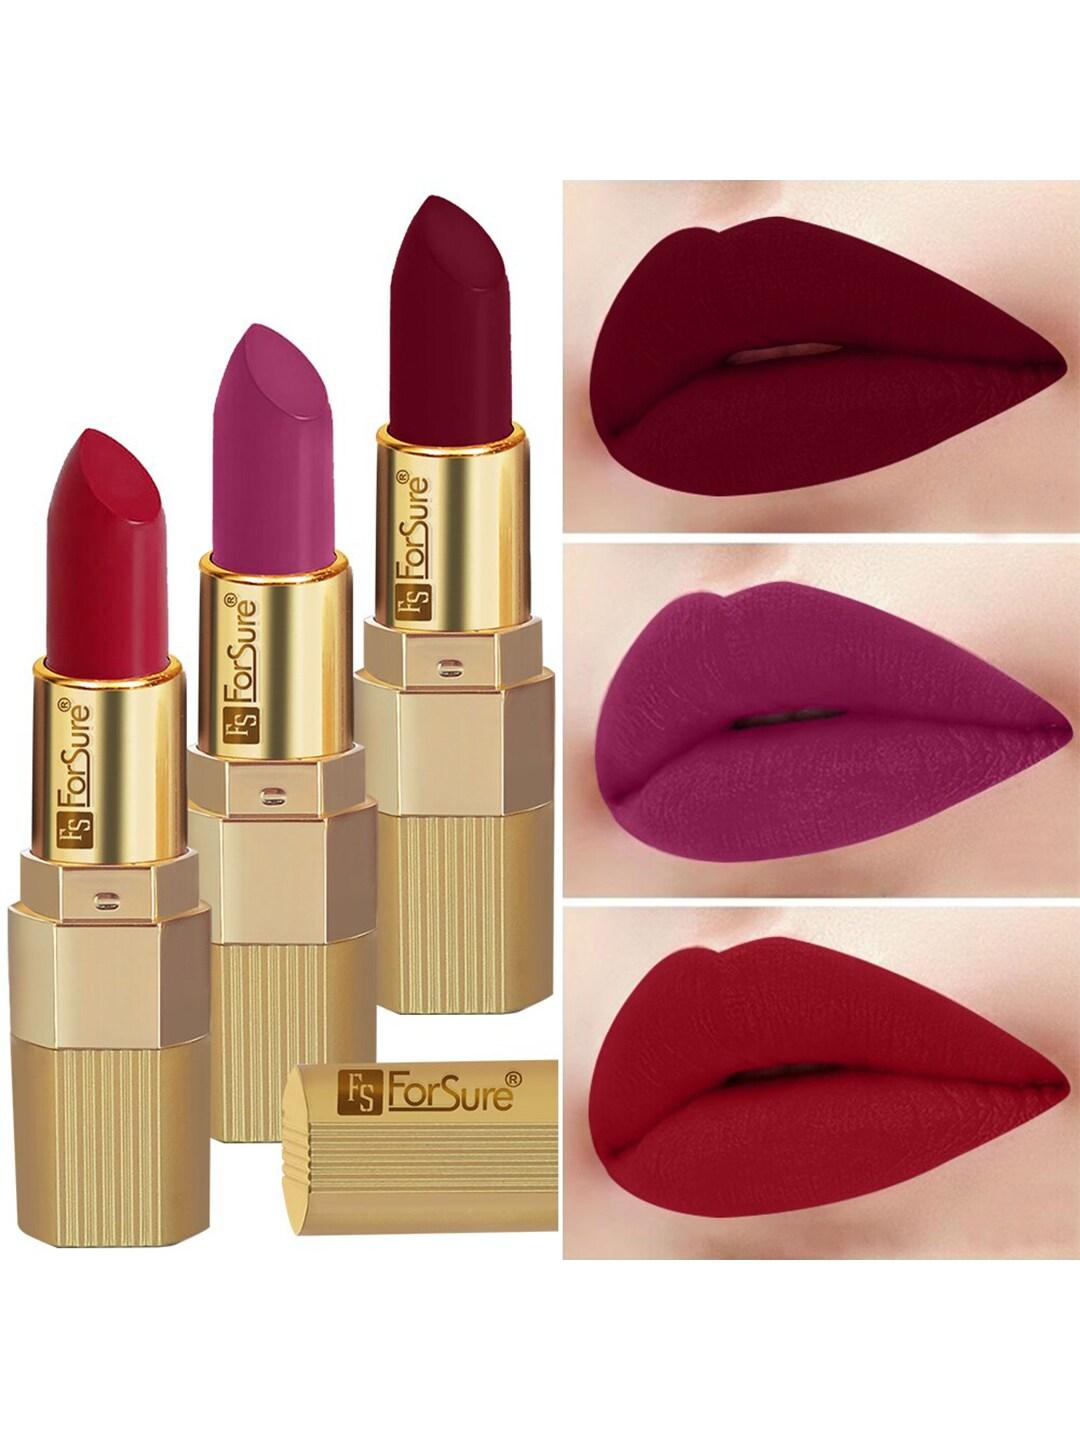 ForSure Set Of 3 Xpression Long-Lasting Highly-Pigmented Creamy Matte Lipstick - 3.5g each